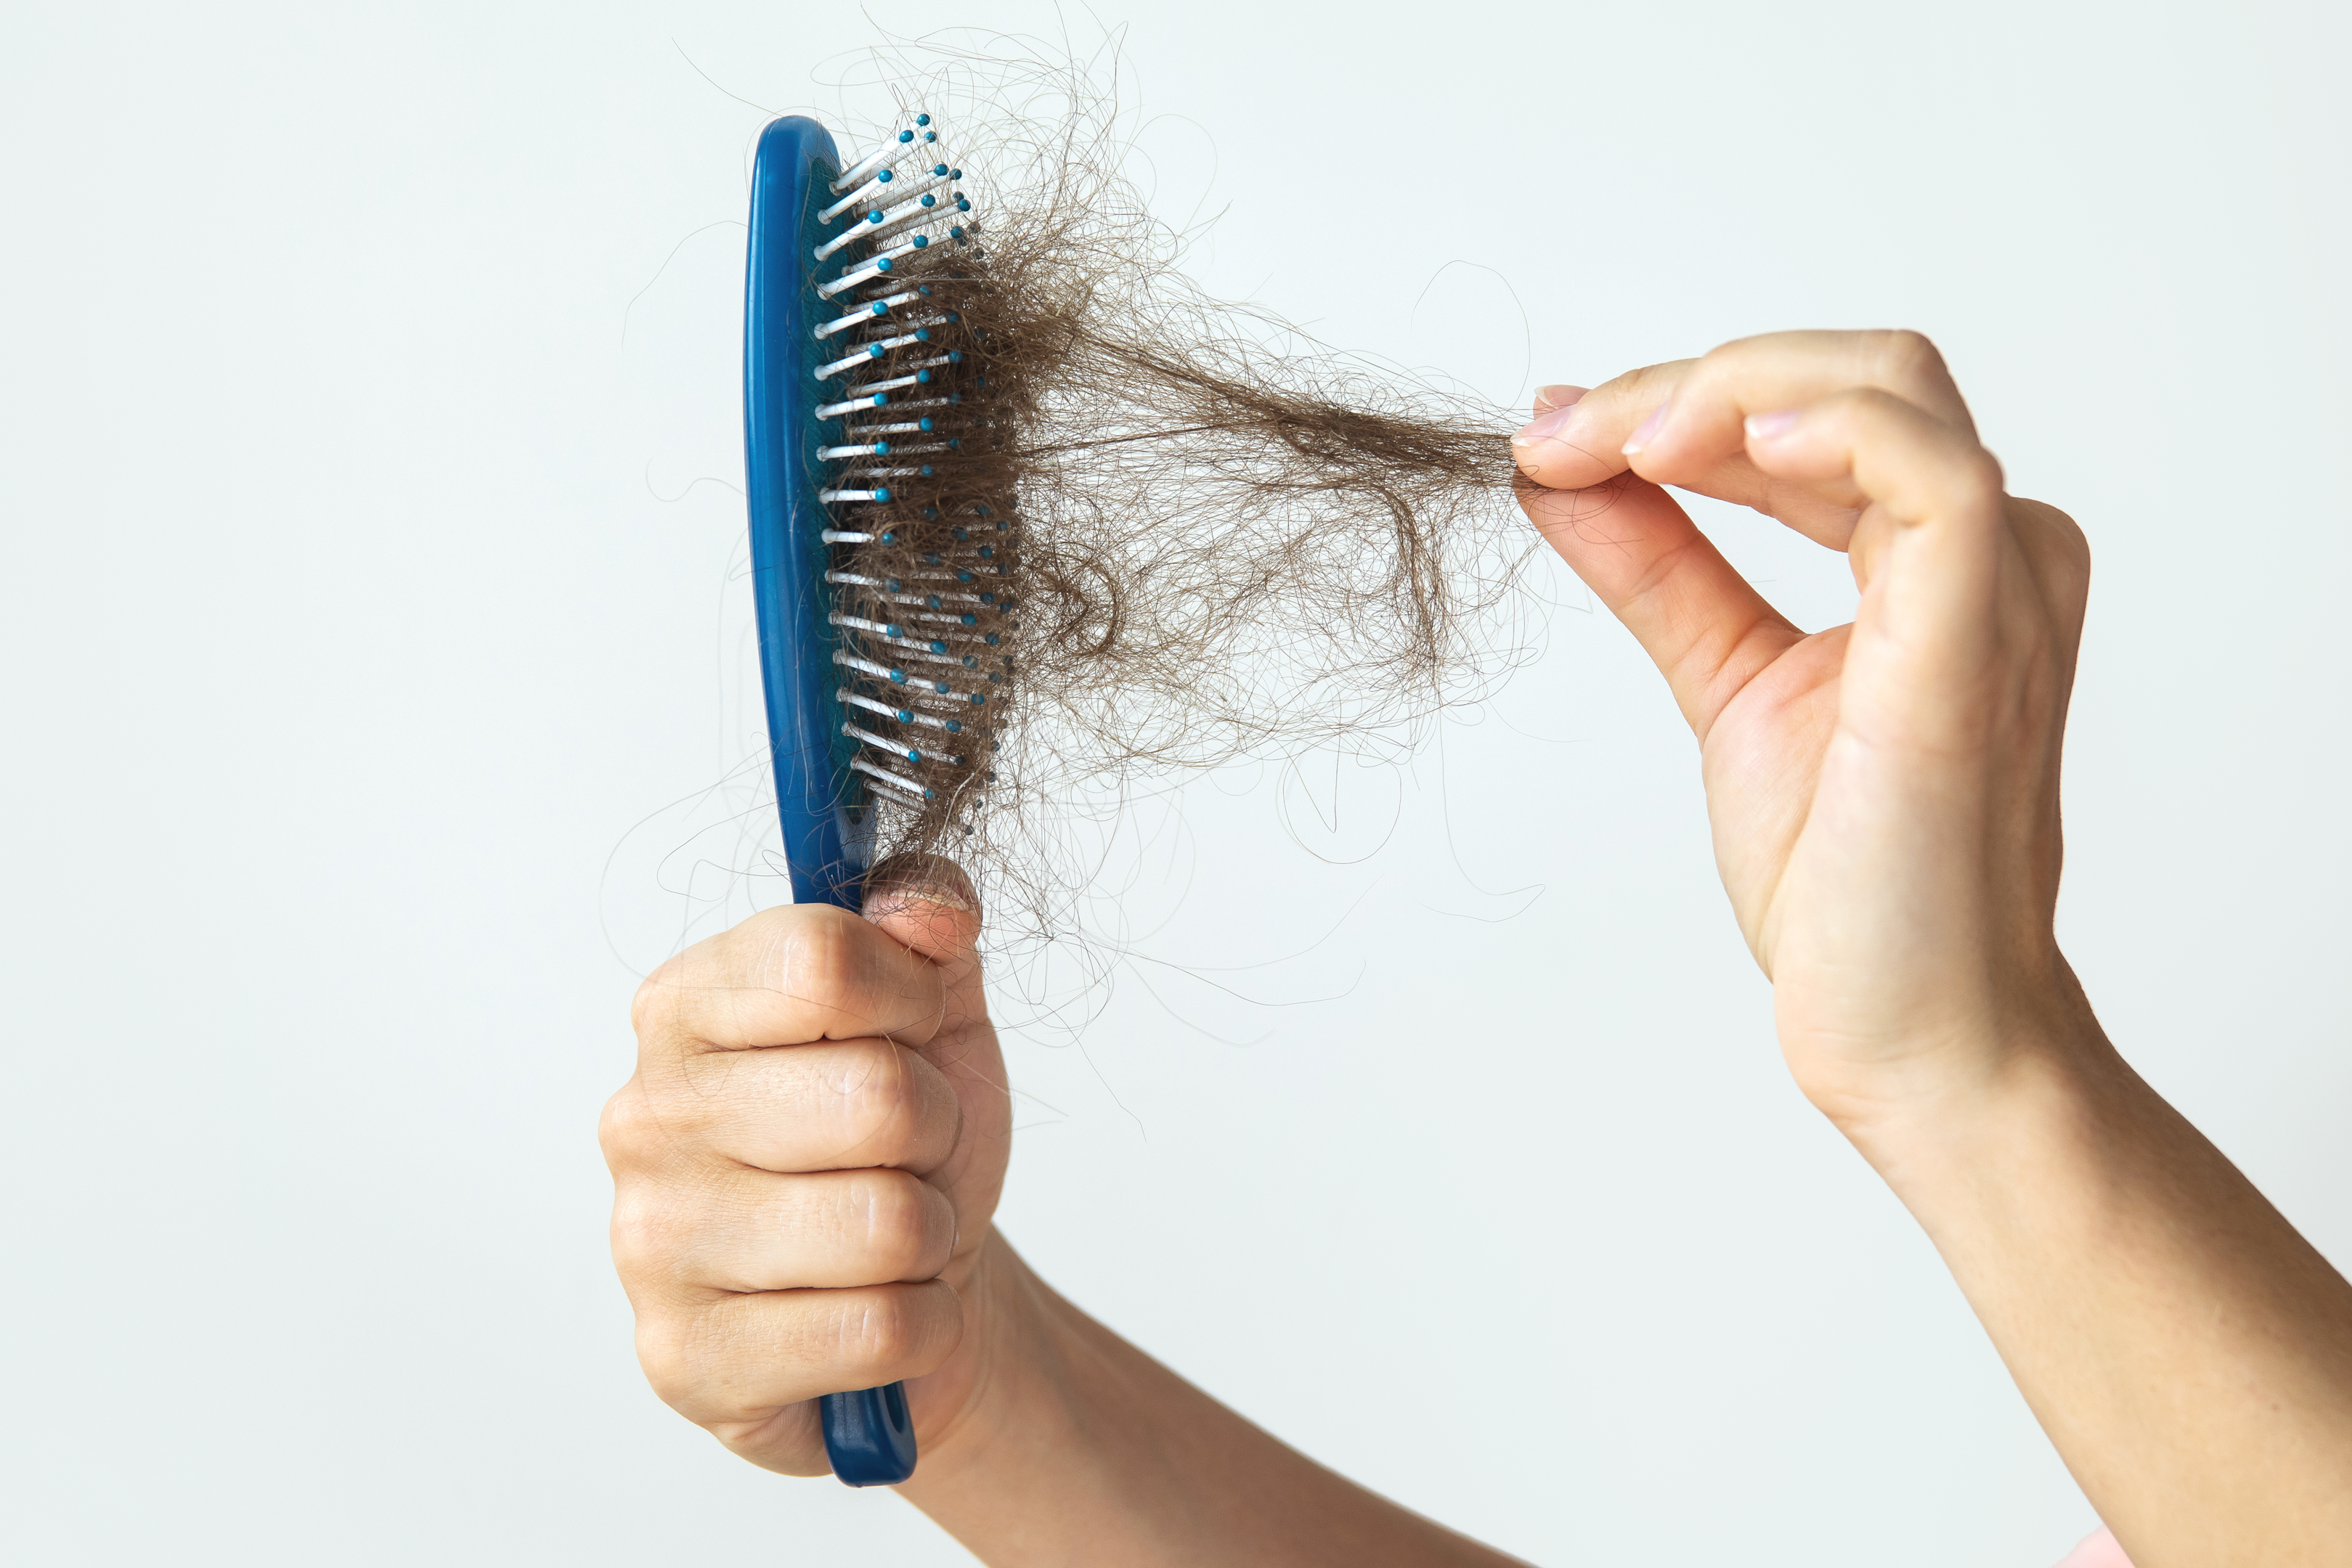 Few hairs in the comb are normal; too many are not.